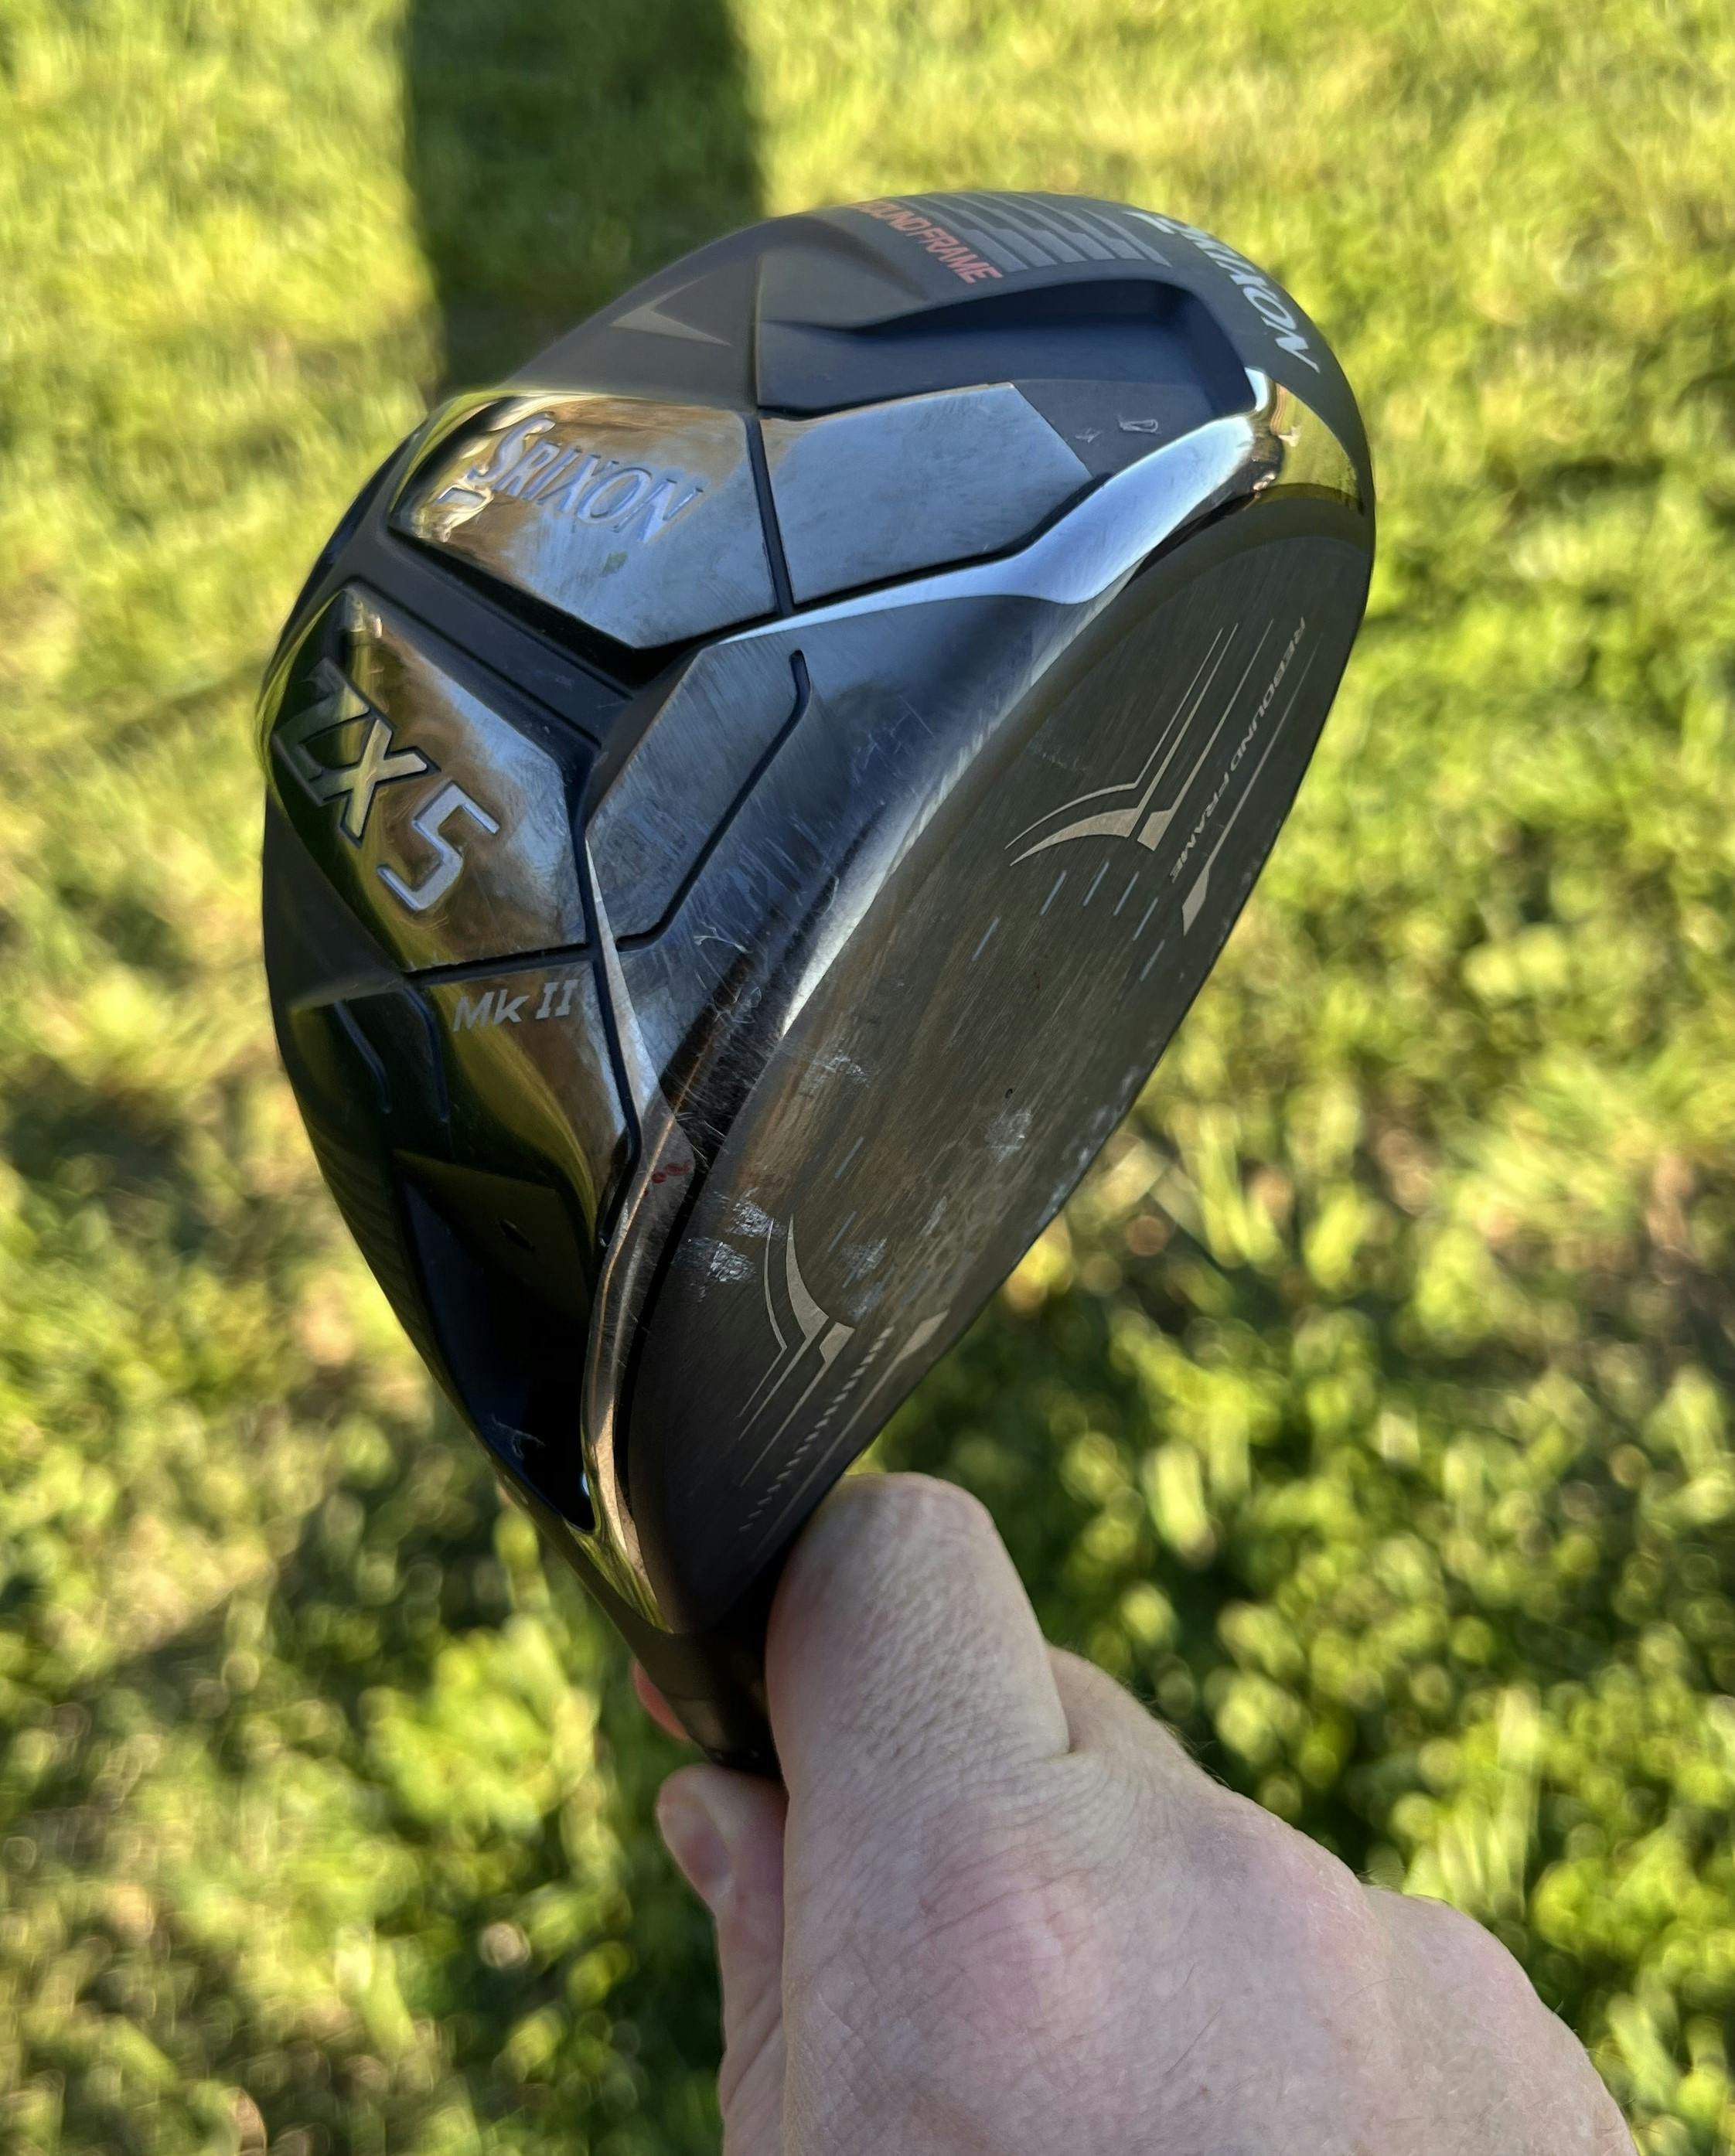 Expert Review: Srixon ZX5 MKII Driver | Curated.com